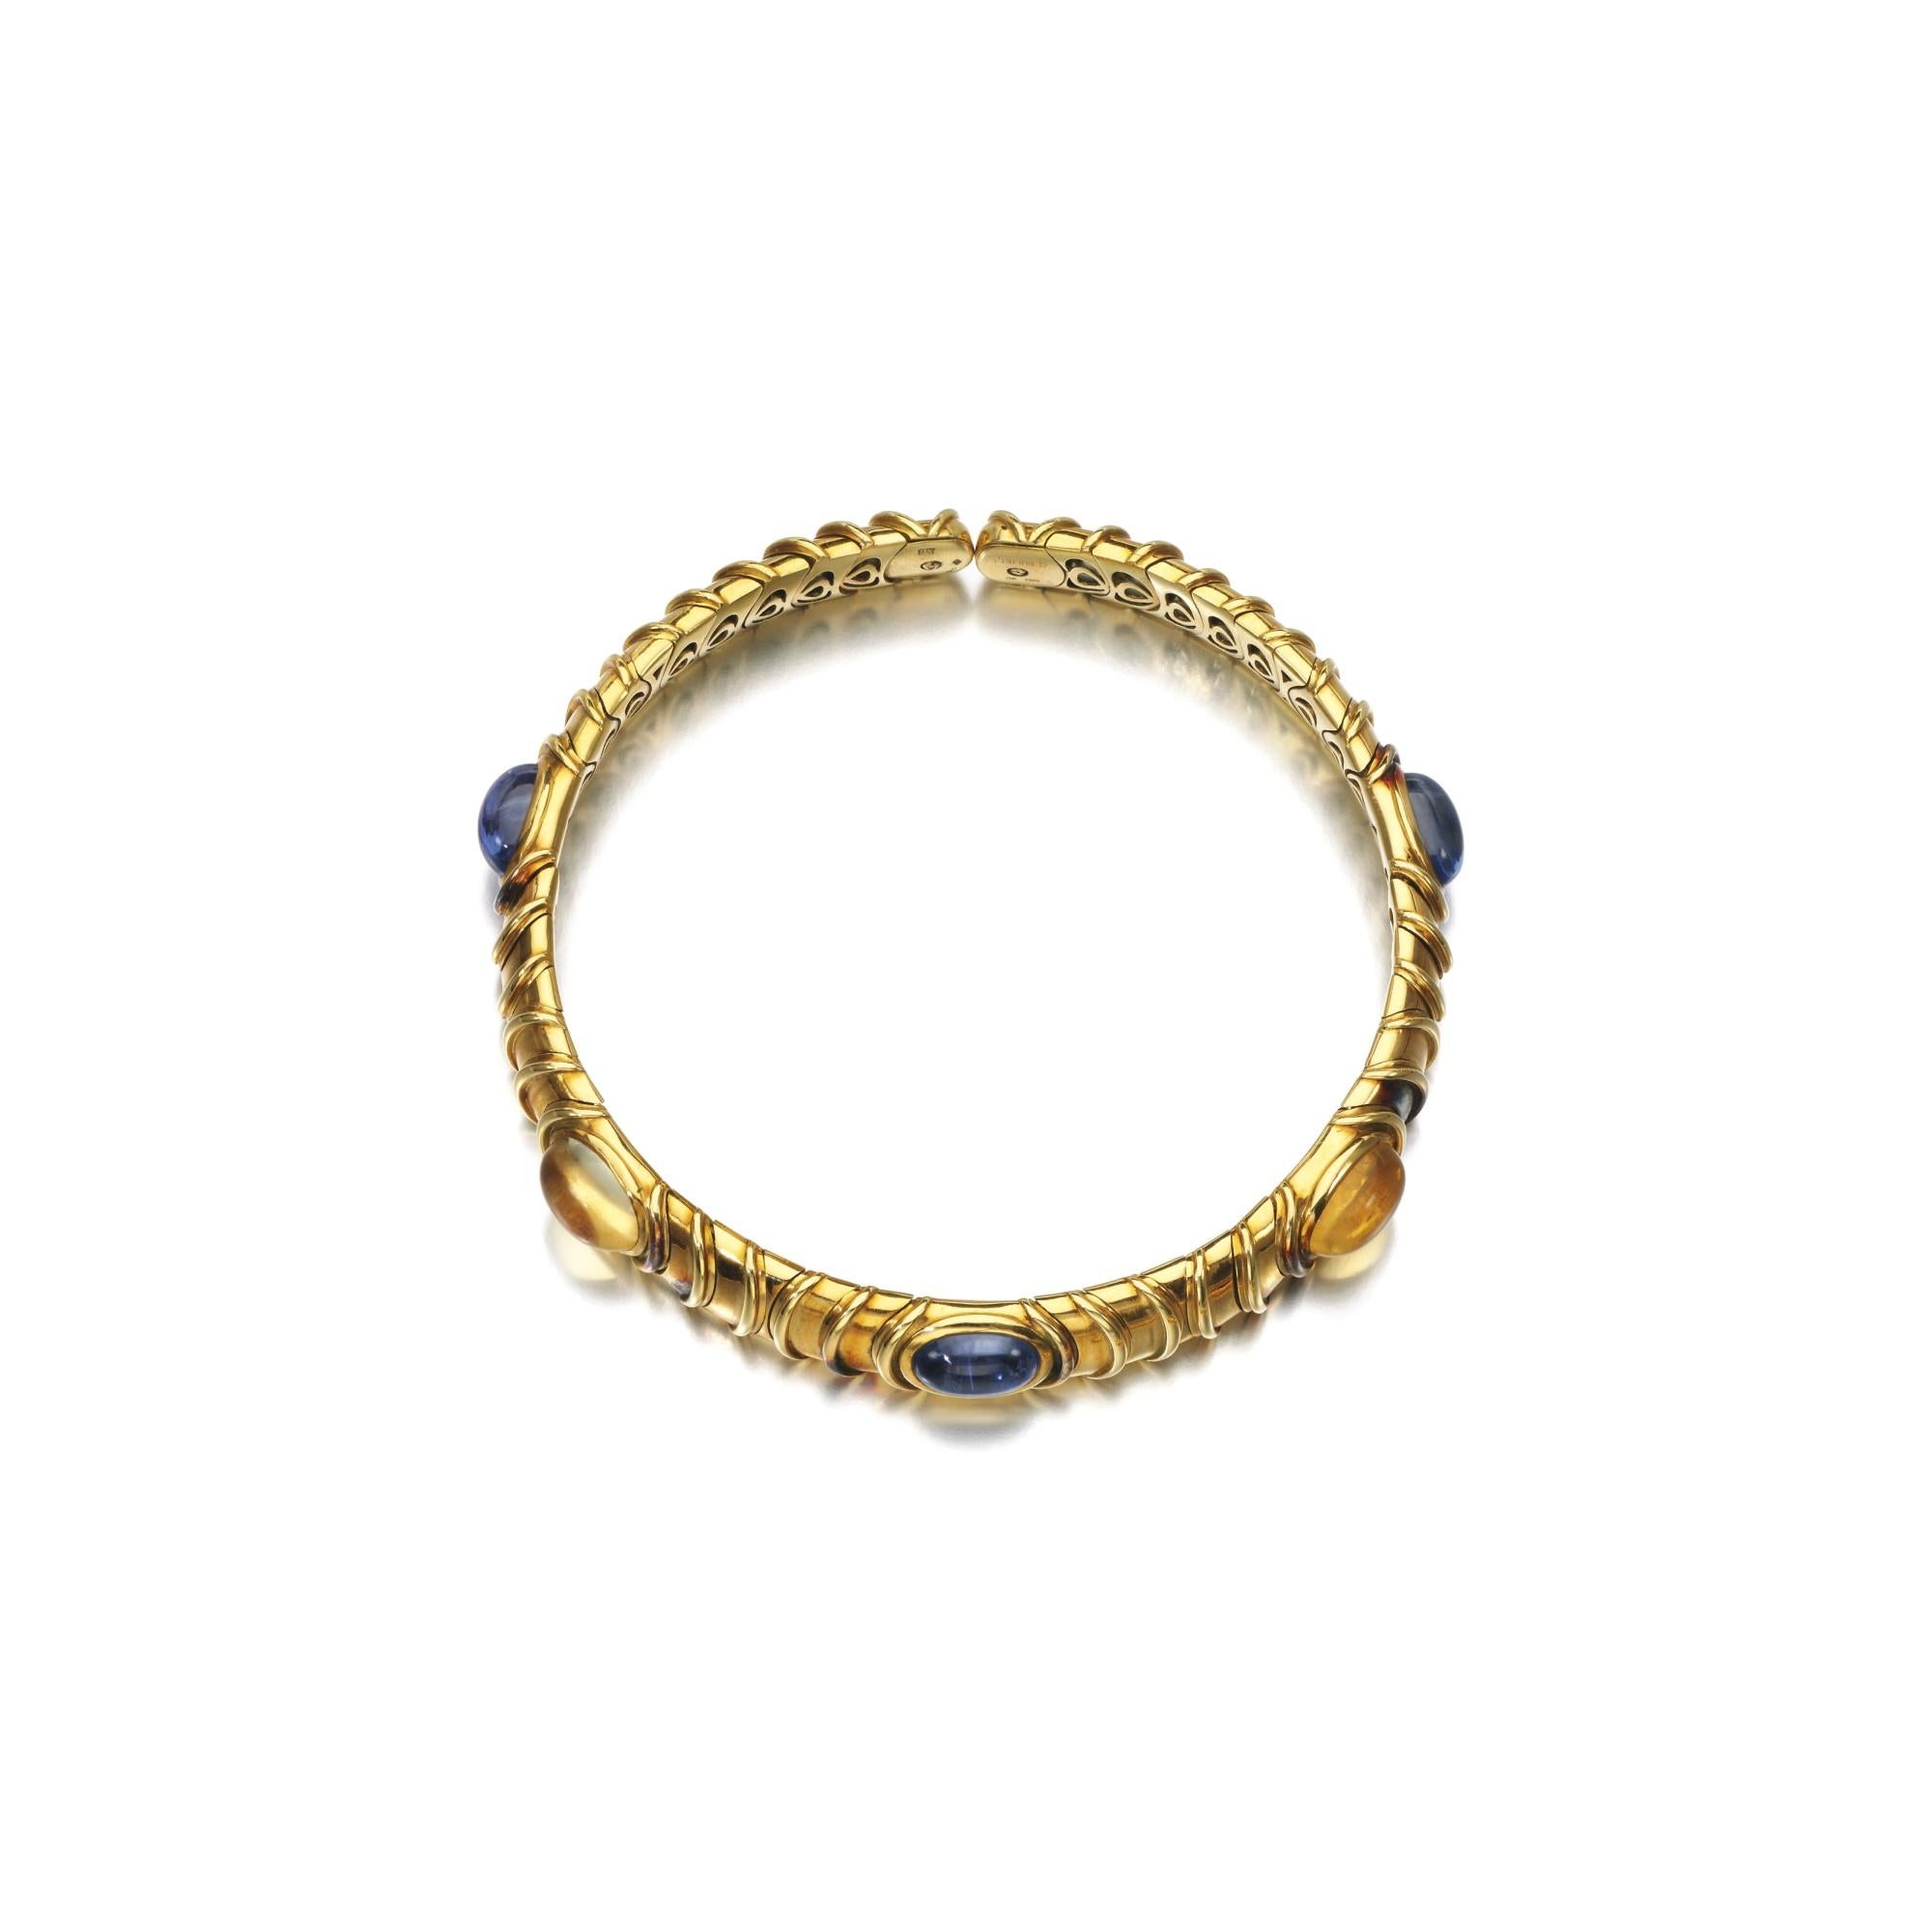 Marina B 18kt yellow gold choker, enriched with alternated blue and yellow cabochon sapphires. Made in Italy, circa 1984.